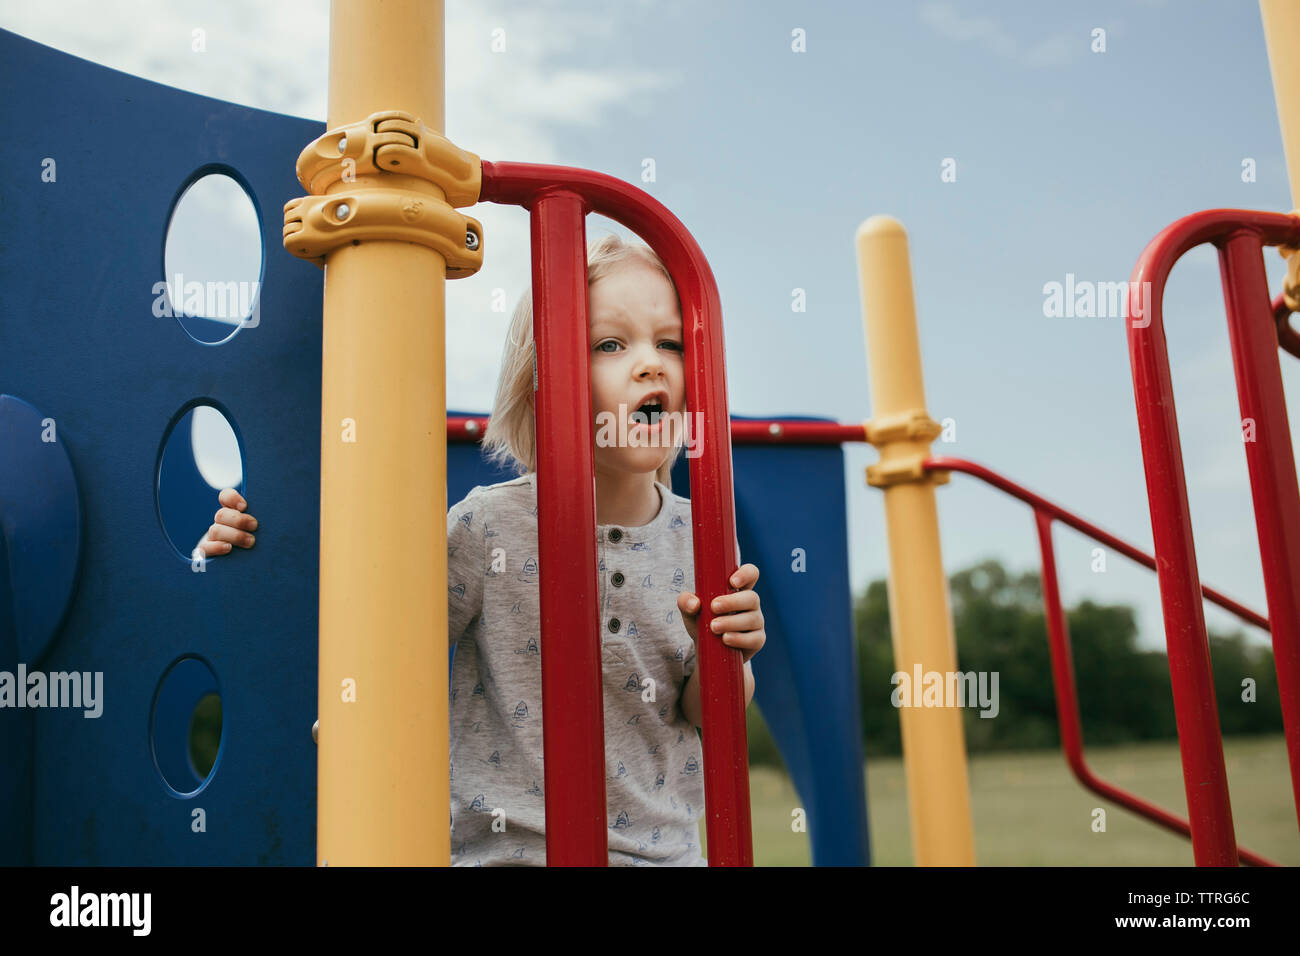 Boy playing on outdoor play equipment at playground Stock Photo